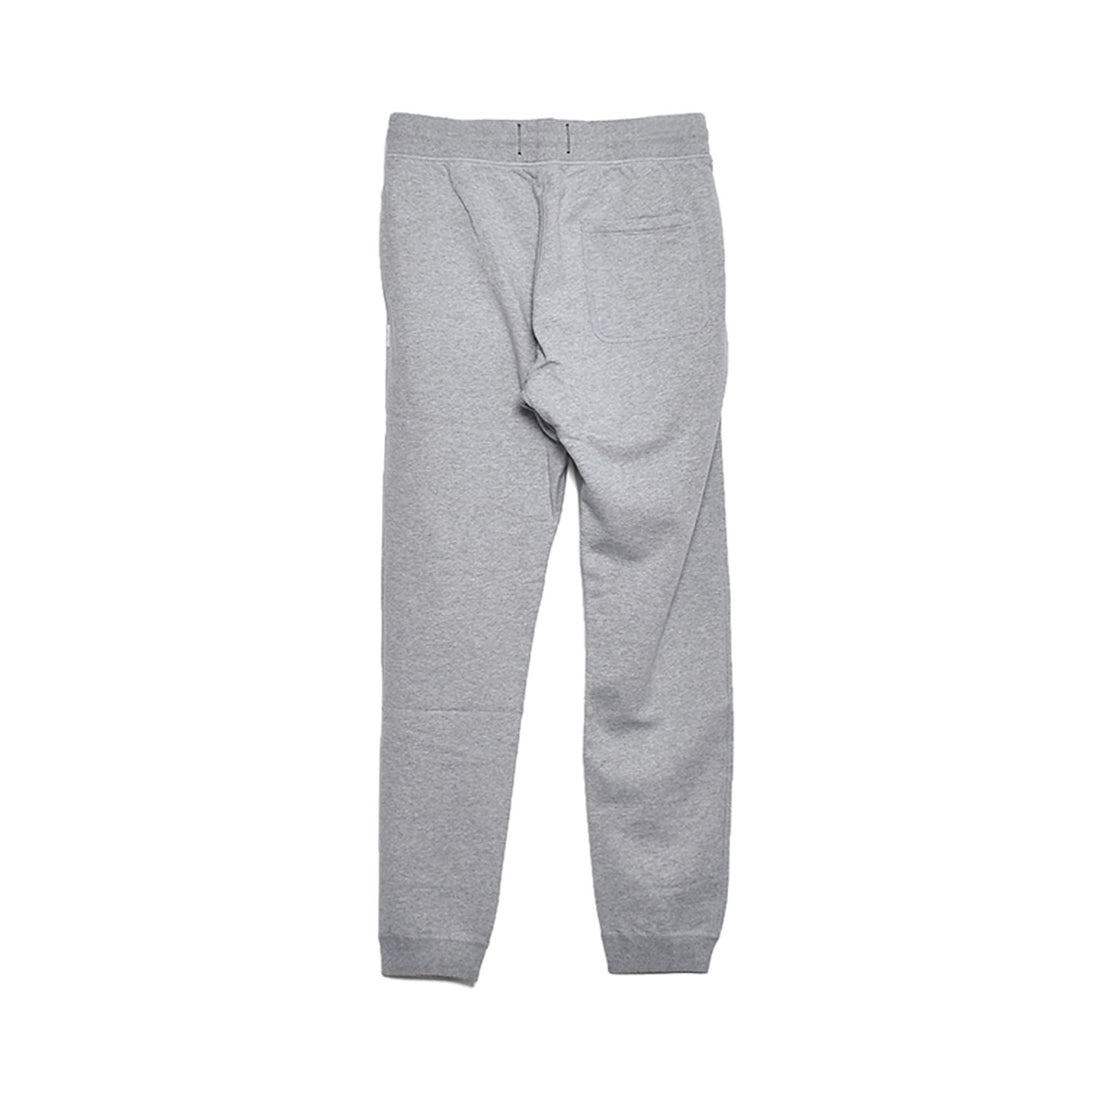 [REIGNING CHAMP]MIDWEIGHT TERRY SLIM SWEATPANT/HATHER GRAY(RC-5075-23FW)